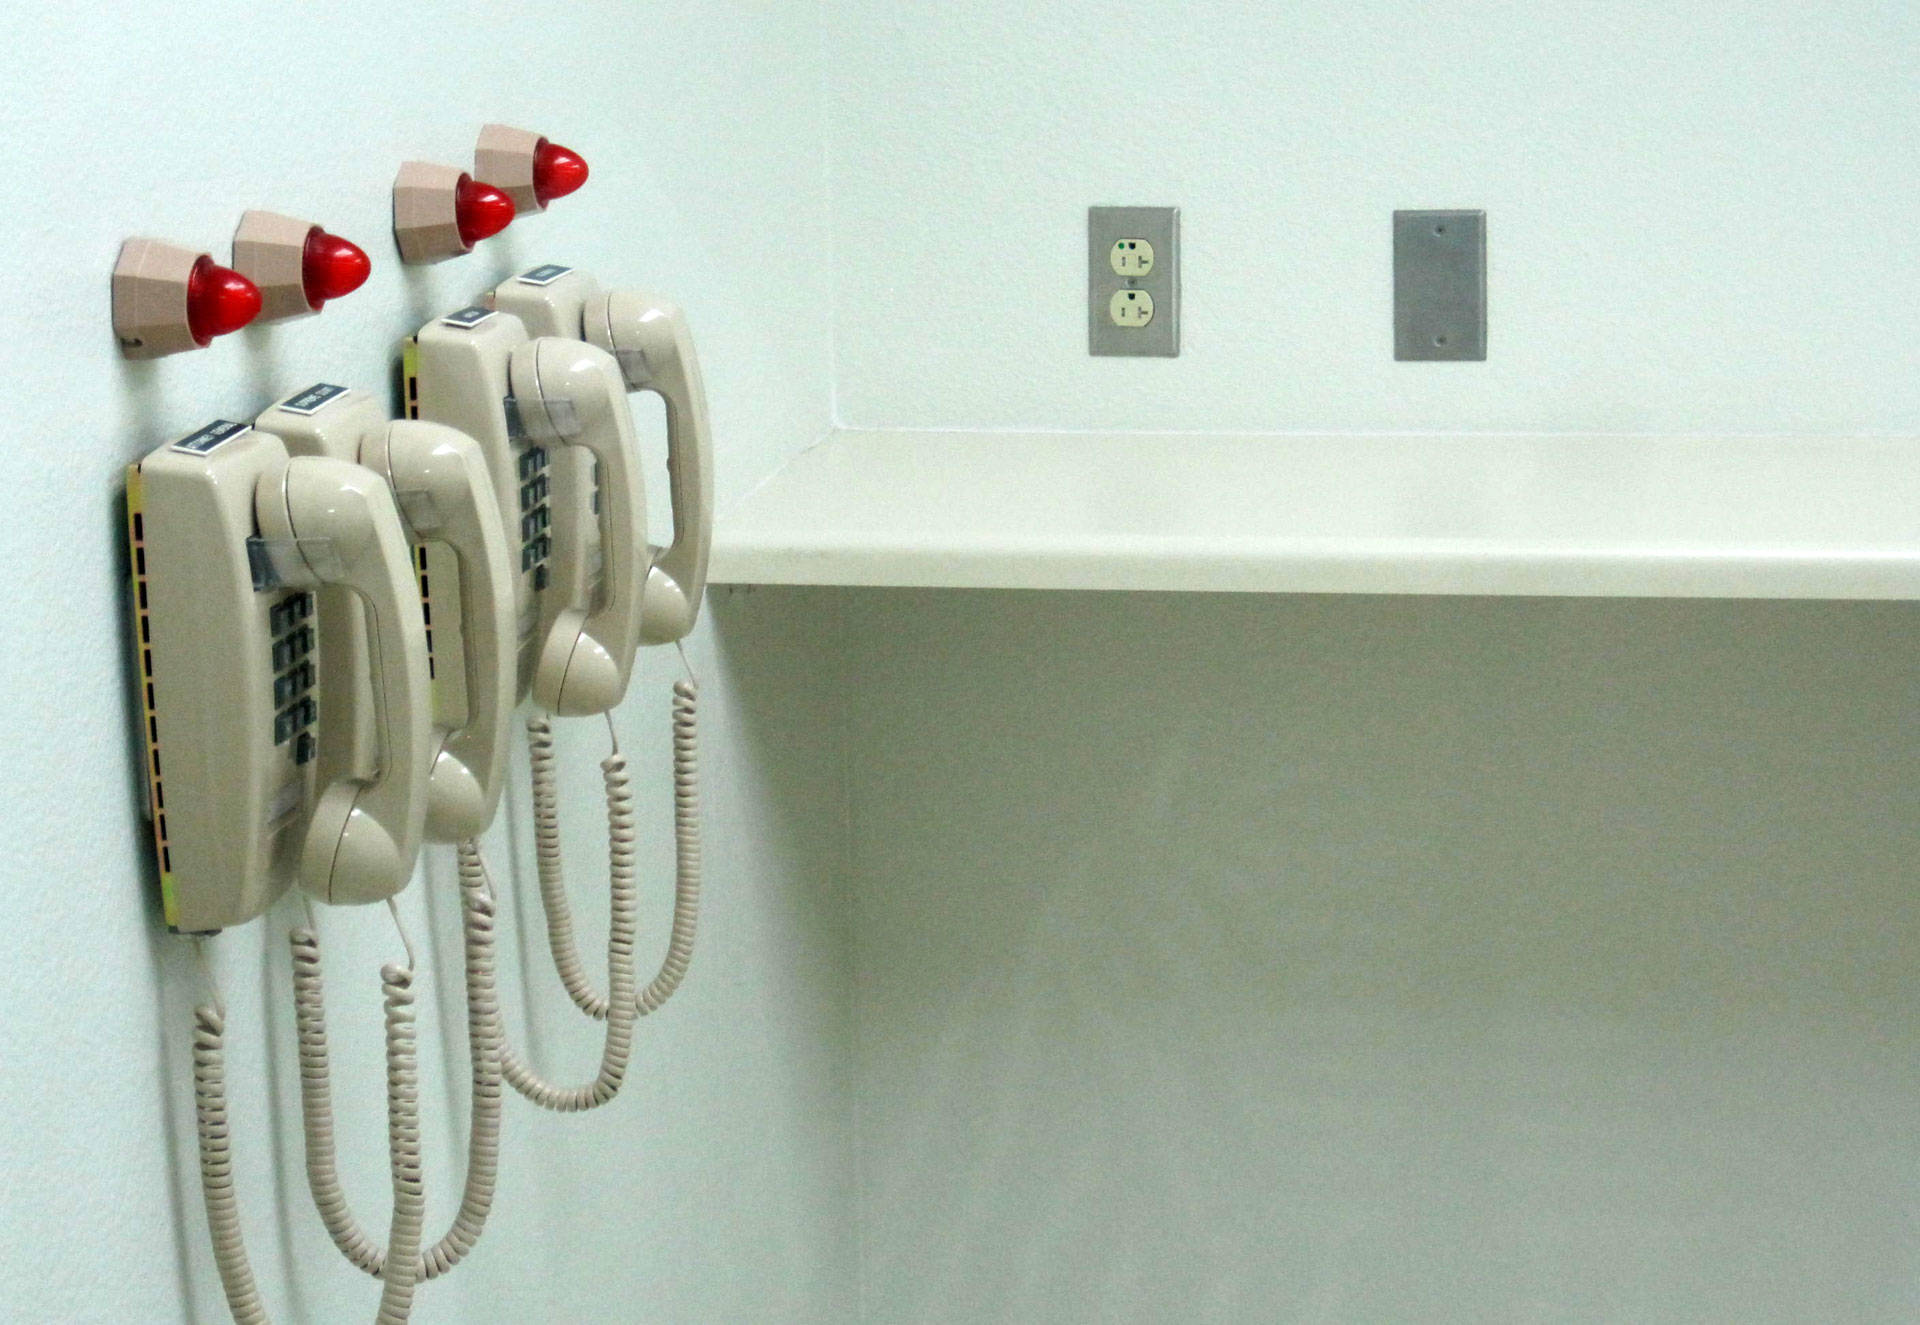 Phones line the wall of the lethal injection chamber at San Quentin State Prison when it was unveiled to reporters in 2010. The facility has never been used. Scott Shafer/KQED